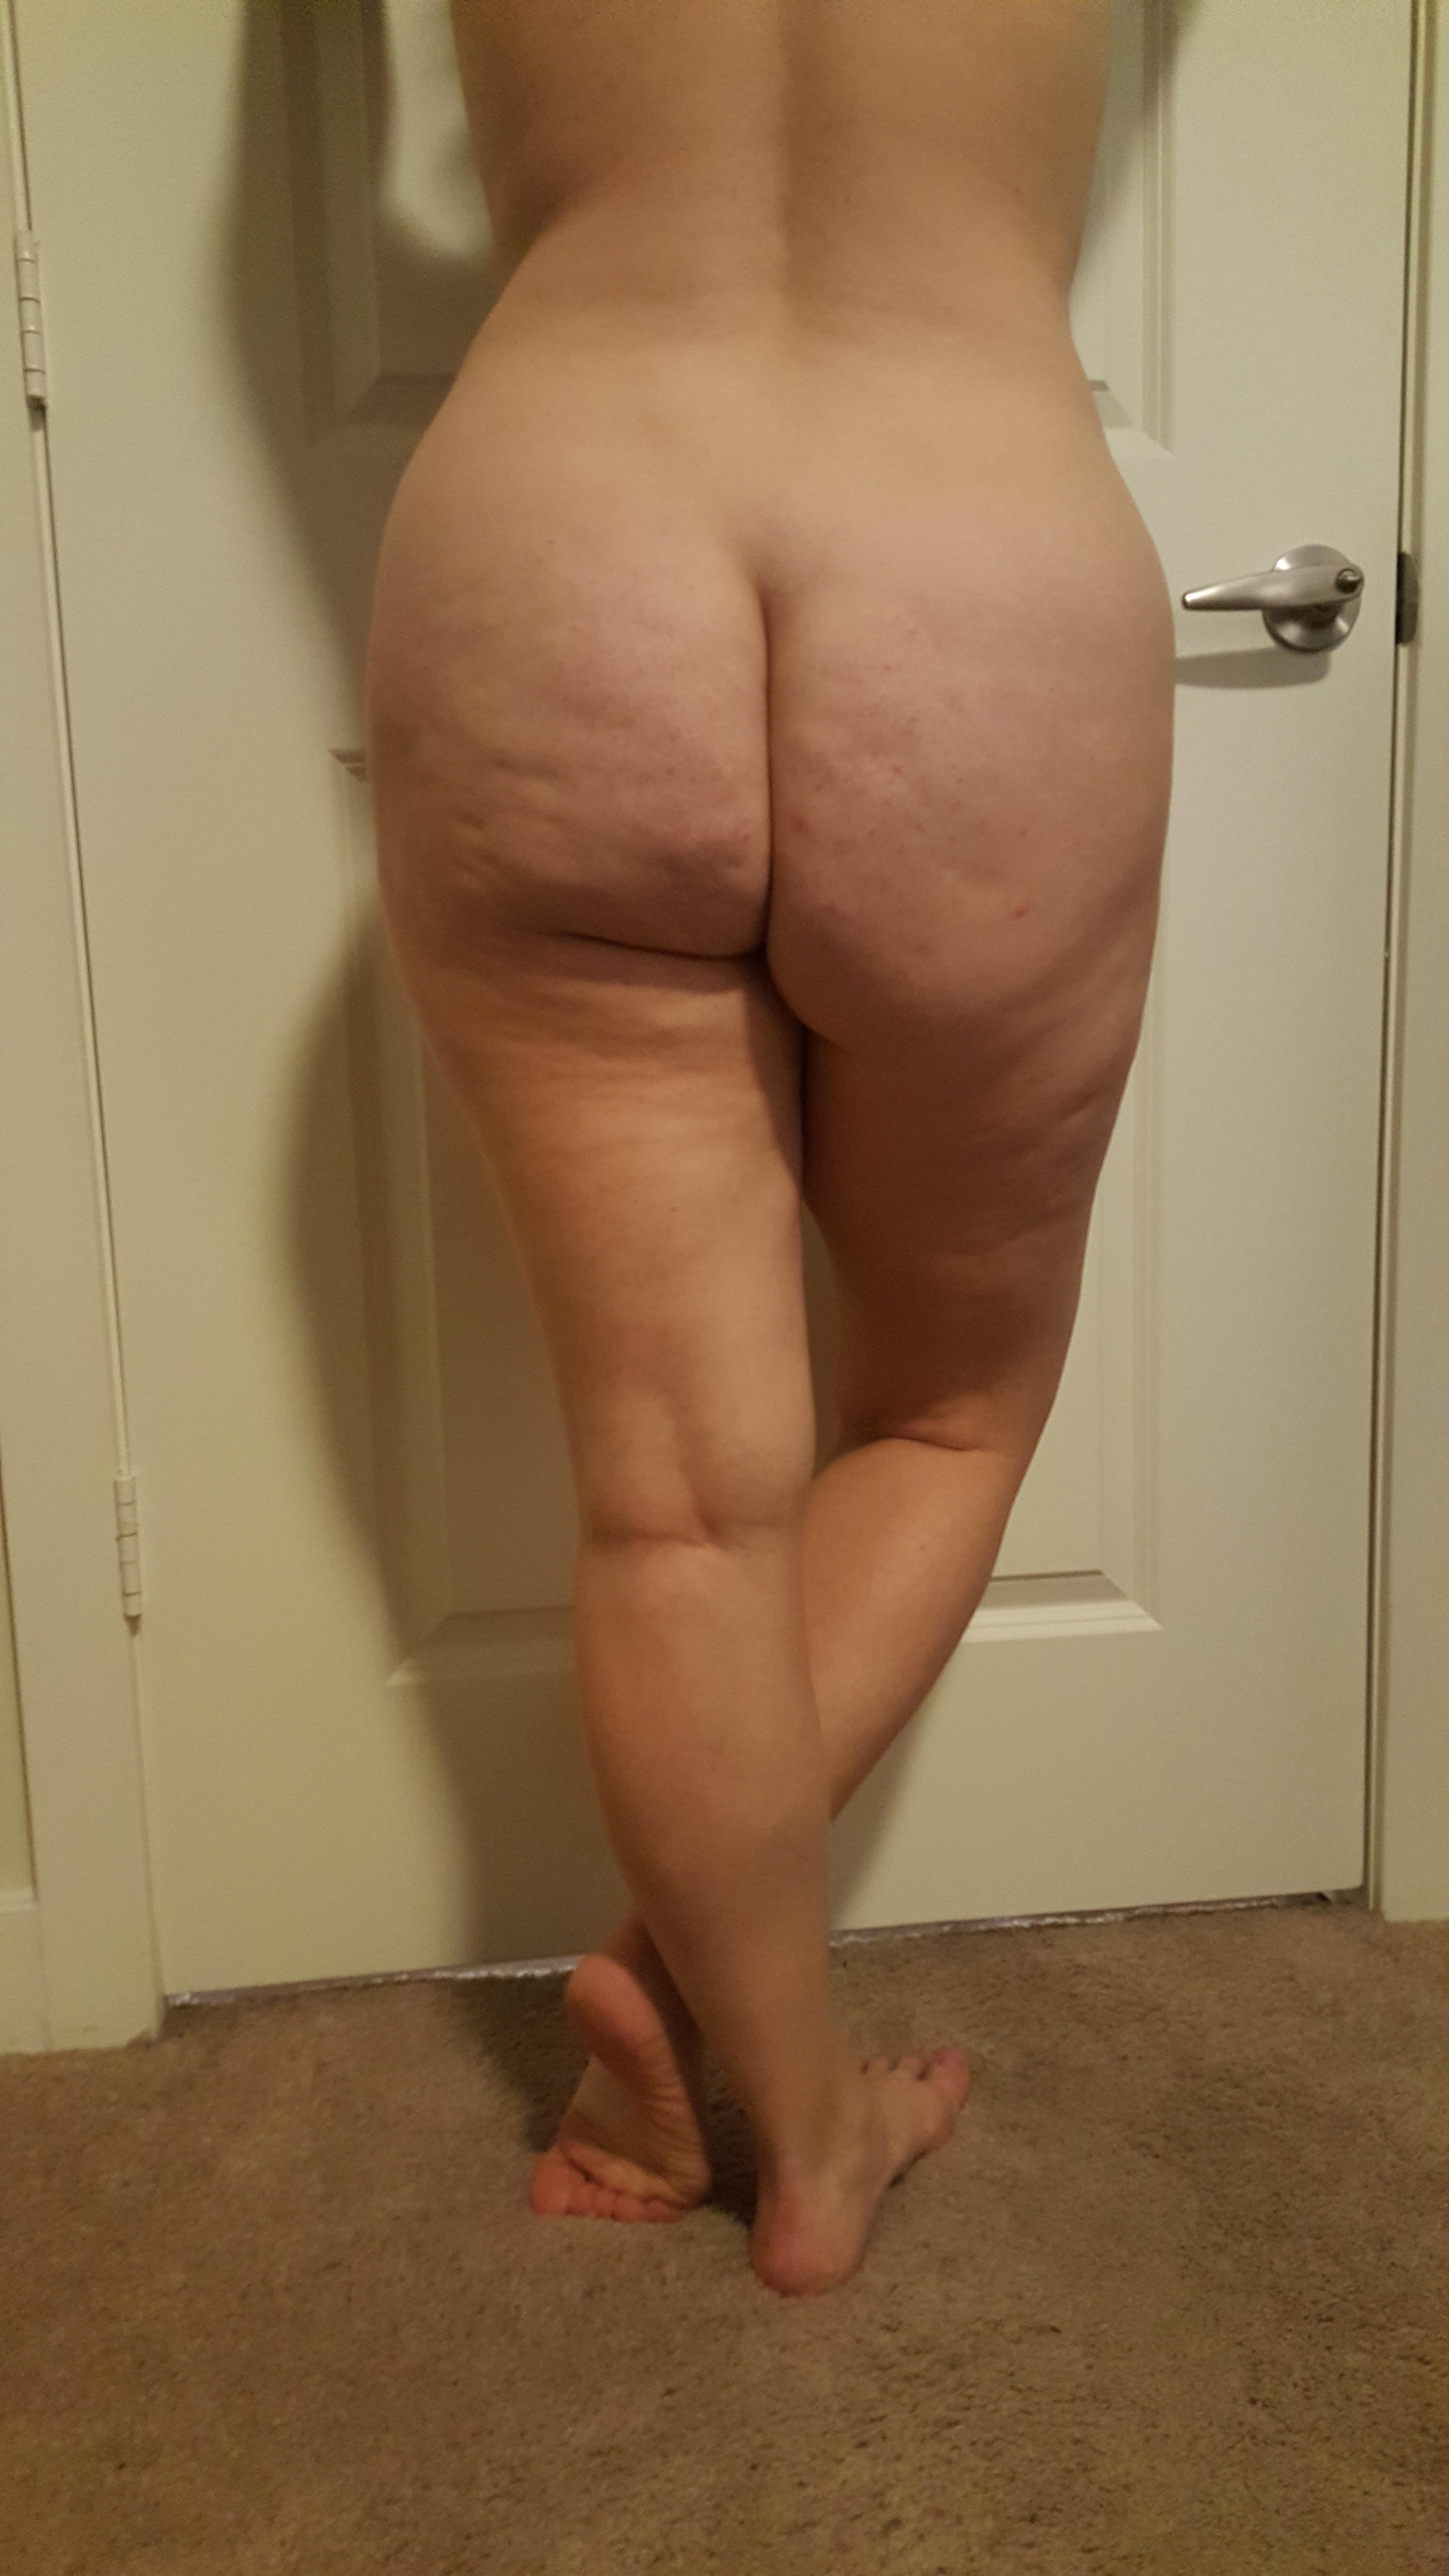 Wife With Big Ass - Wife's big booty Porn Pic - EPORNER